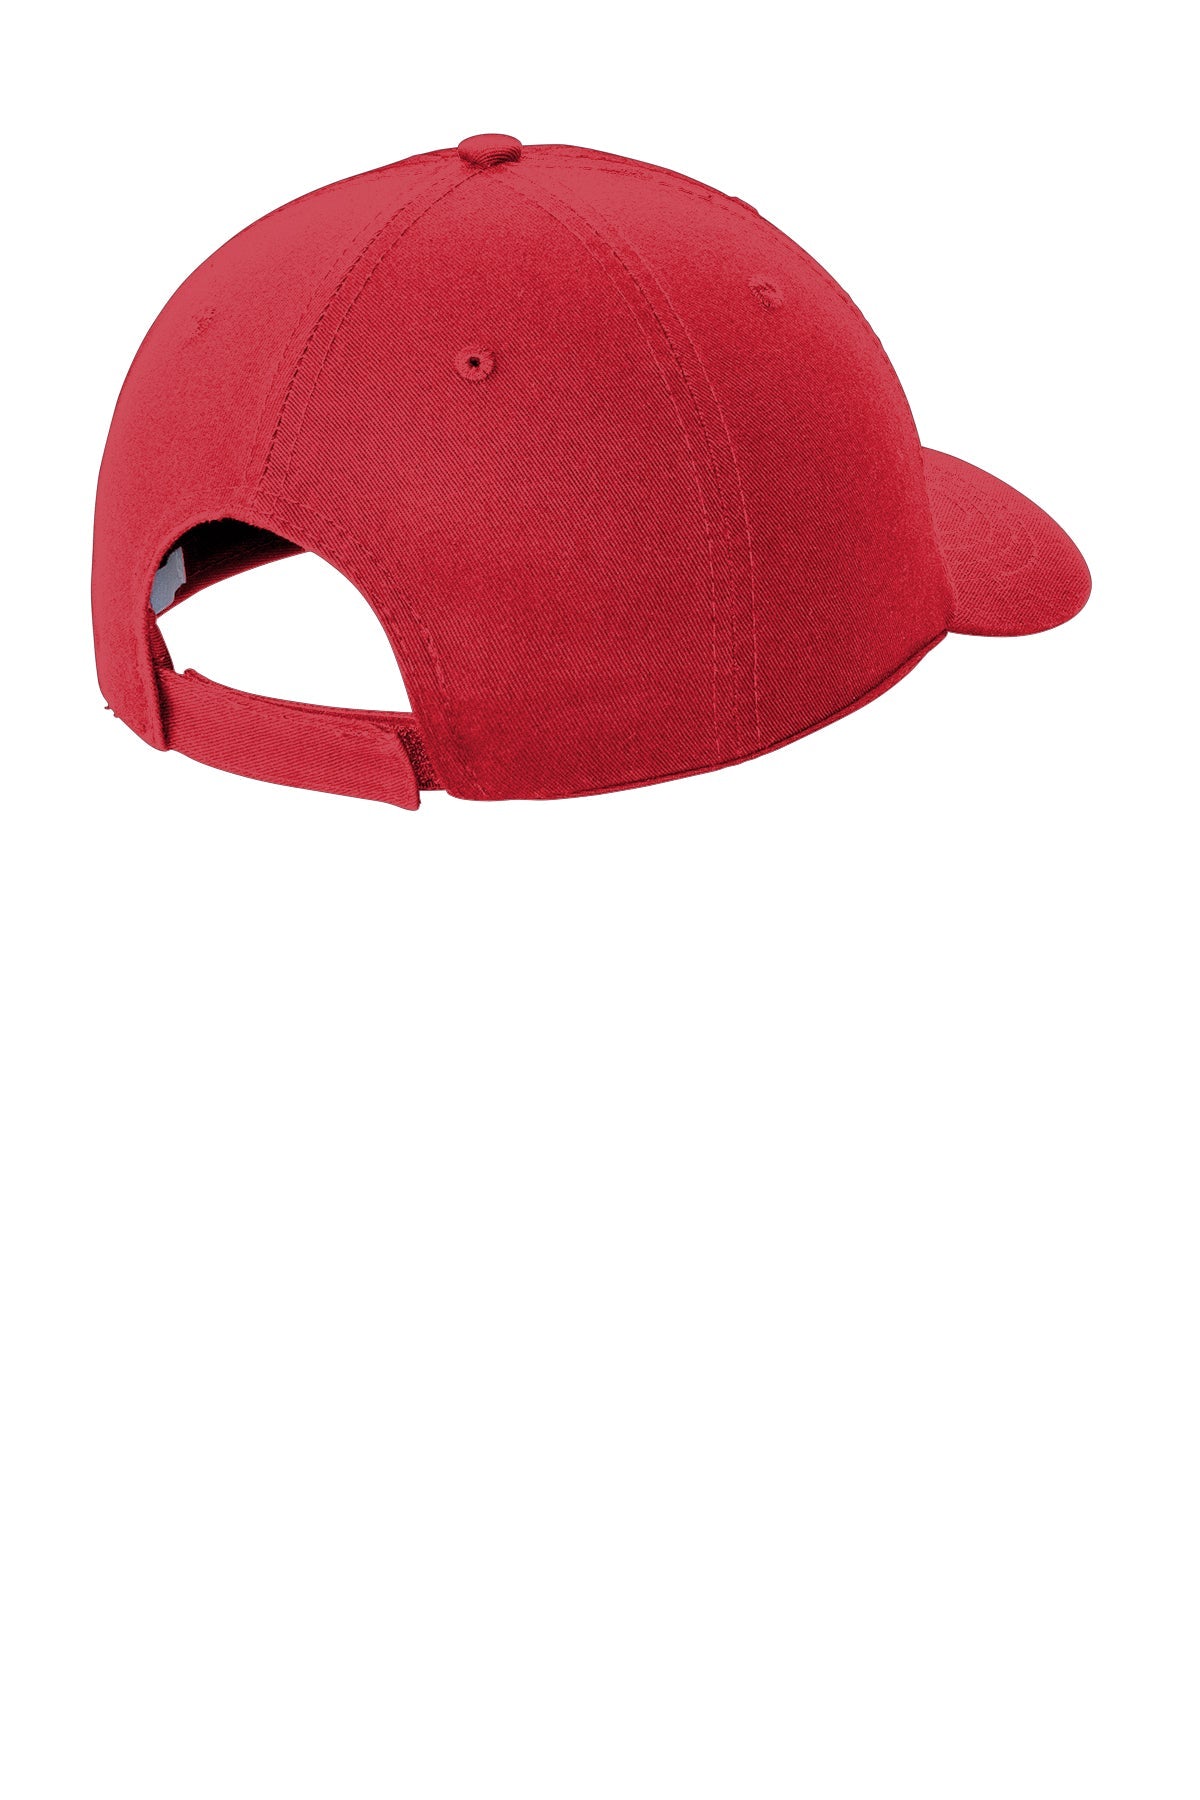 Port & Company Washed Twill Branded Caps, Red